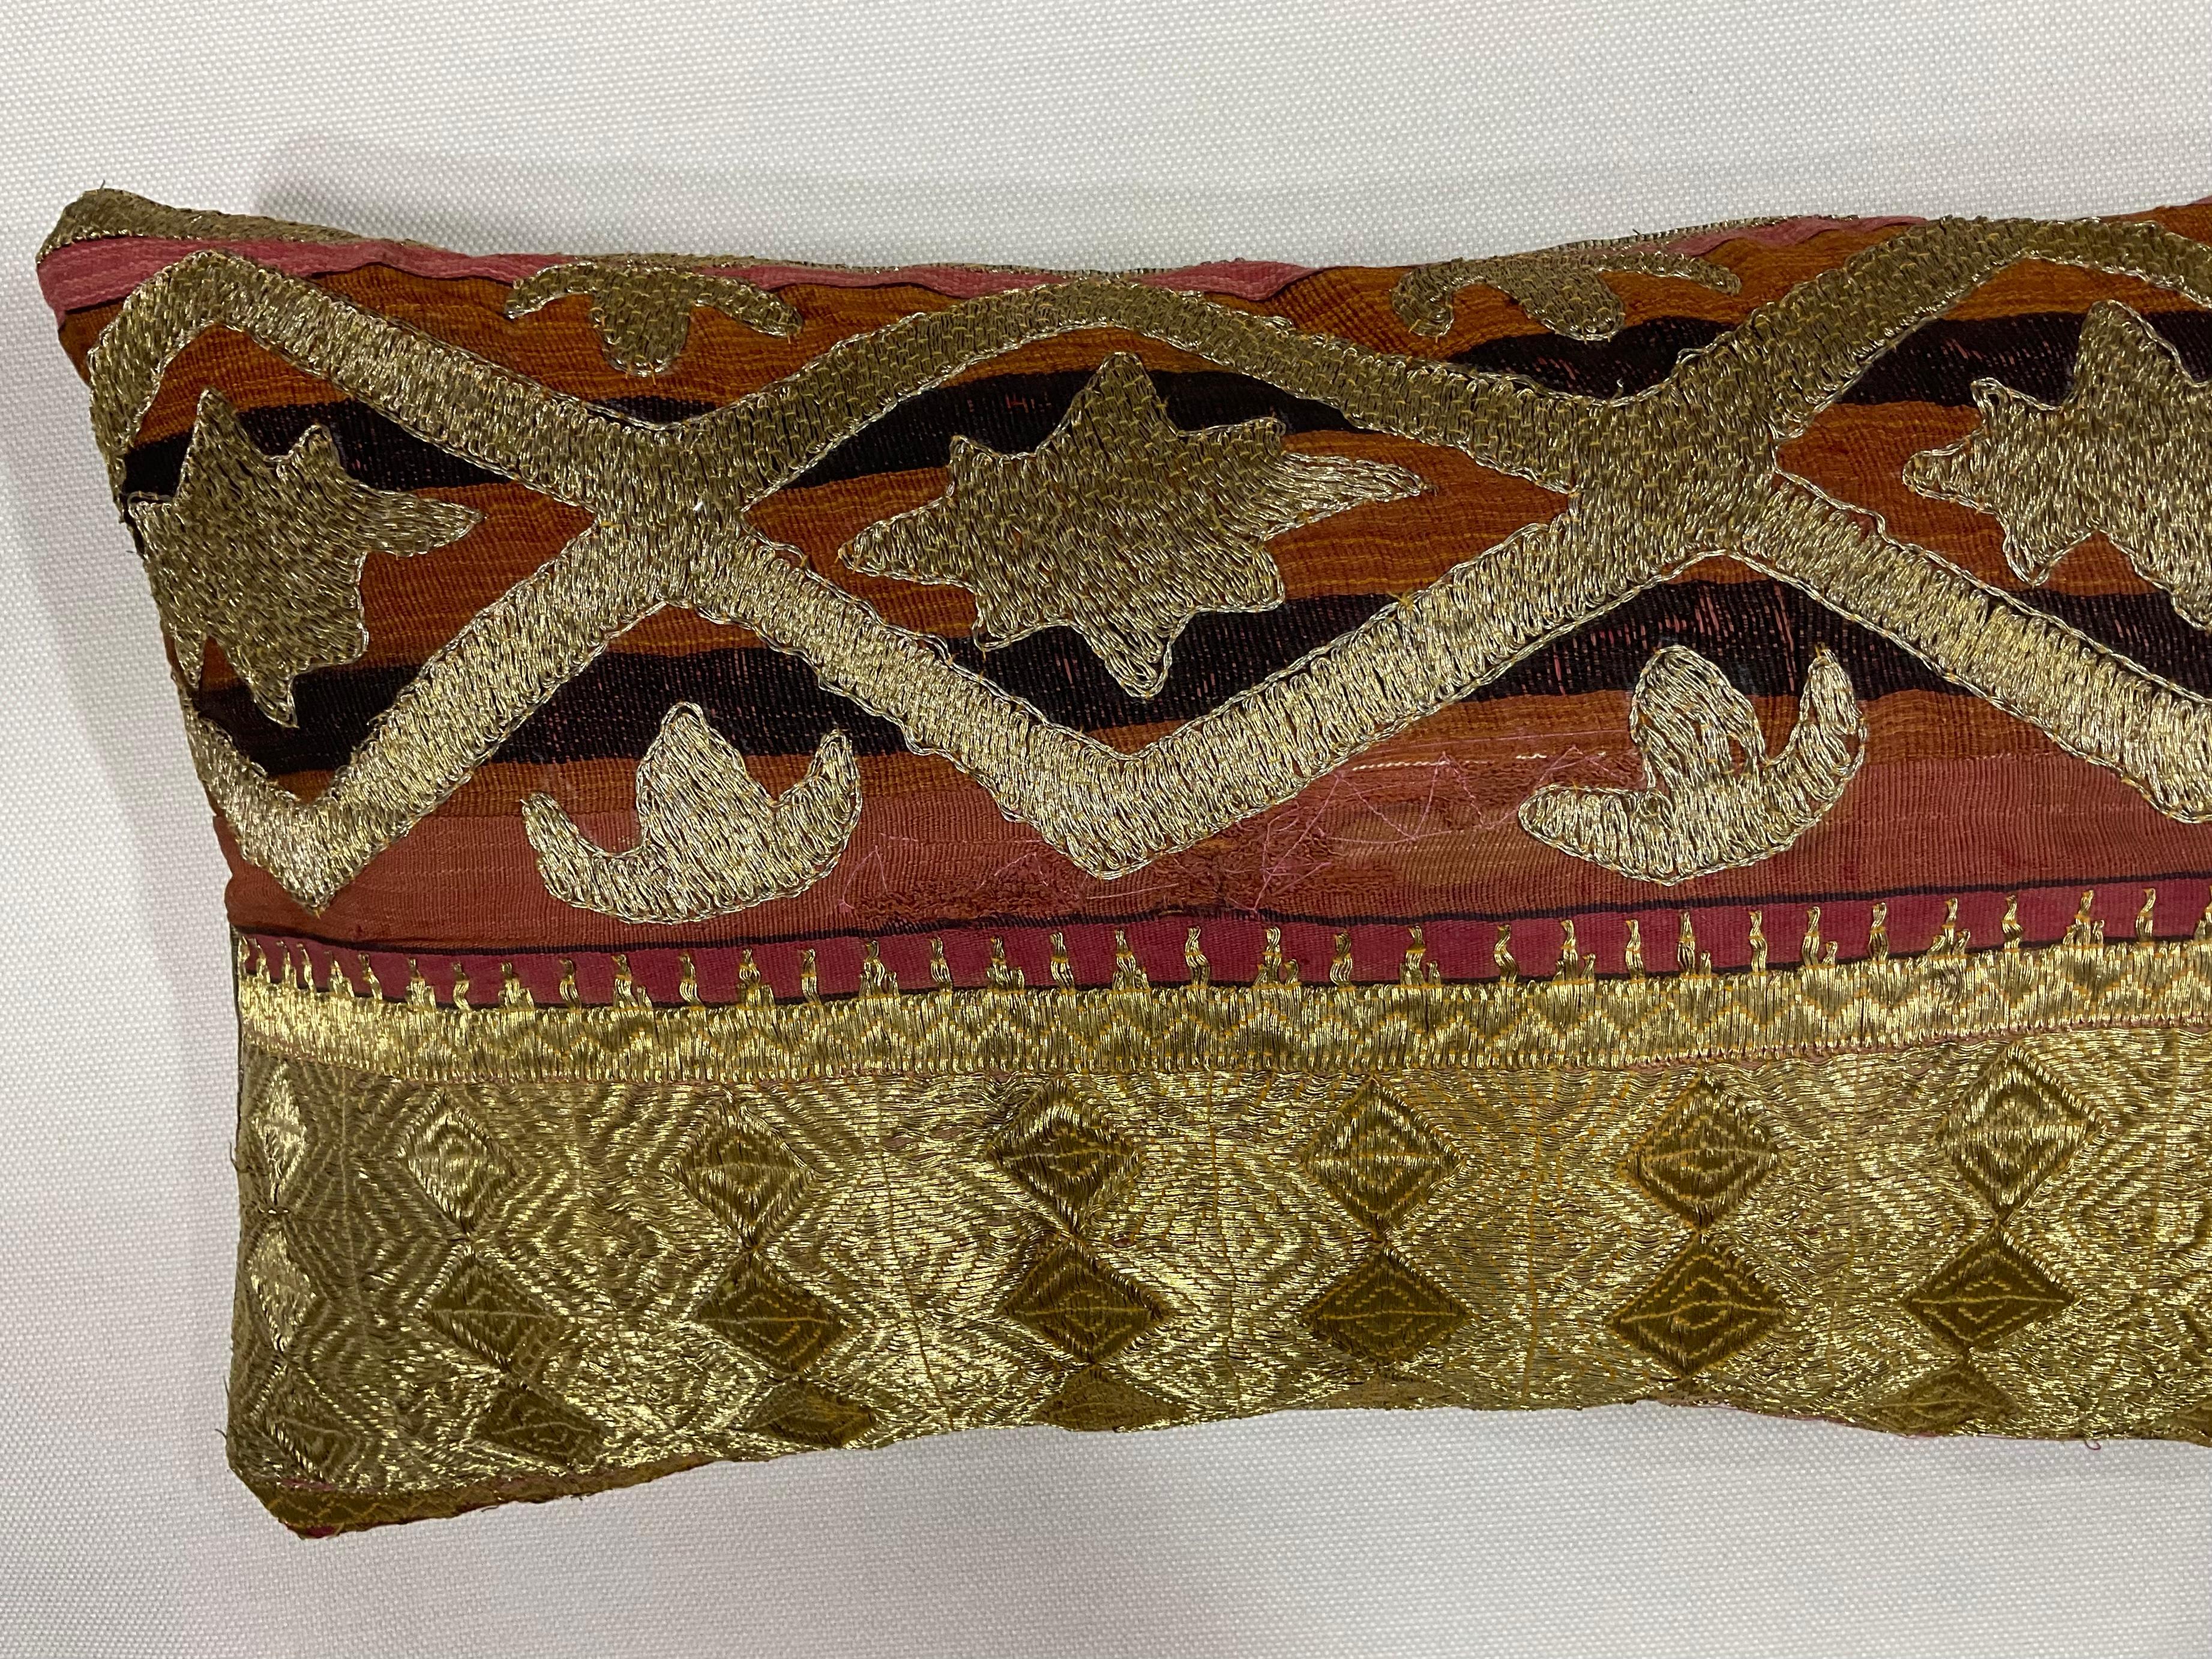 Hand-Crafted Single Antique Embroidery Textile Pillow